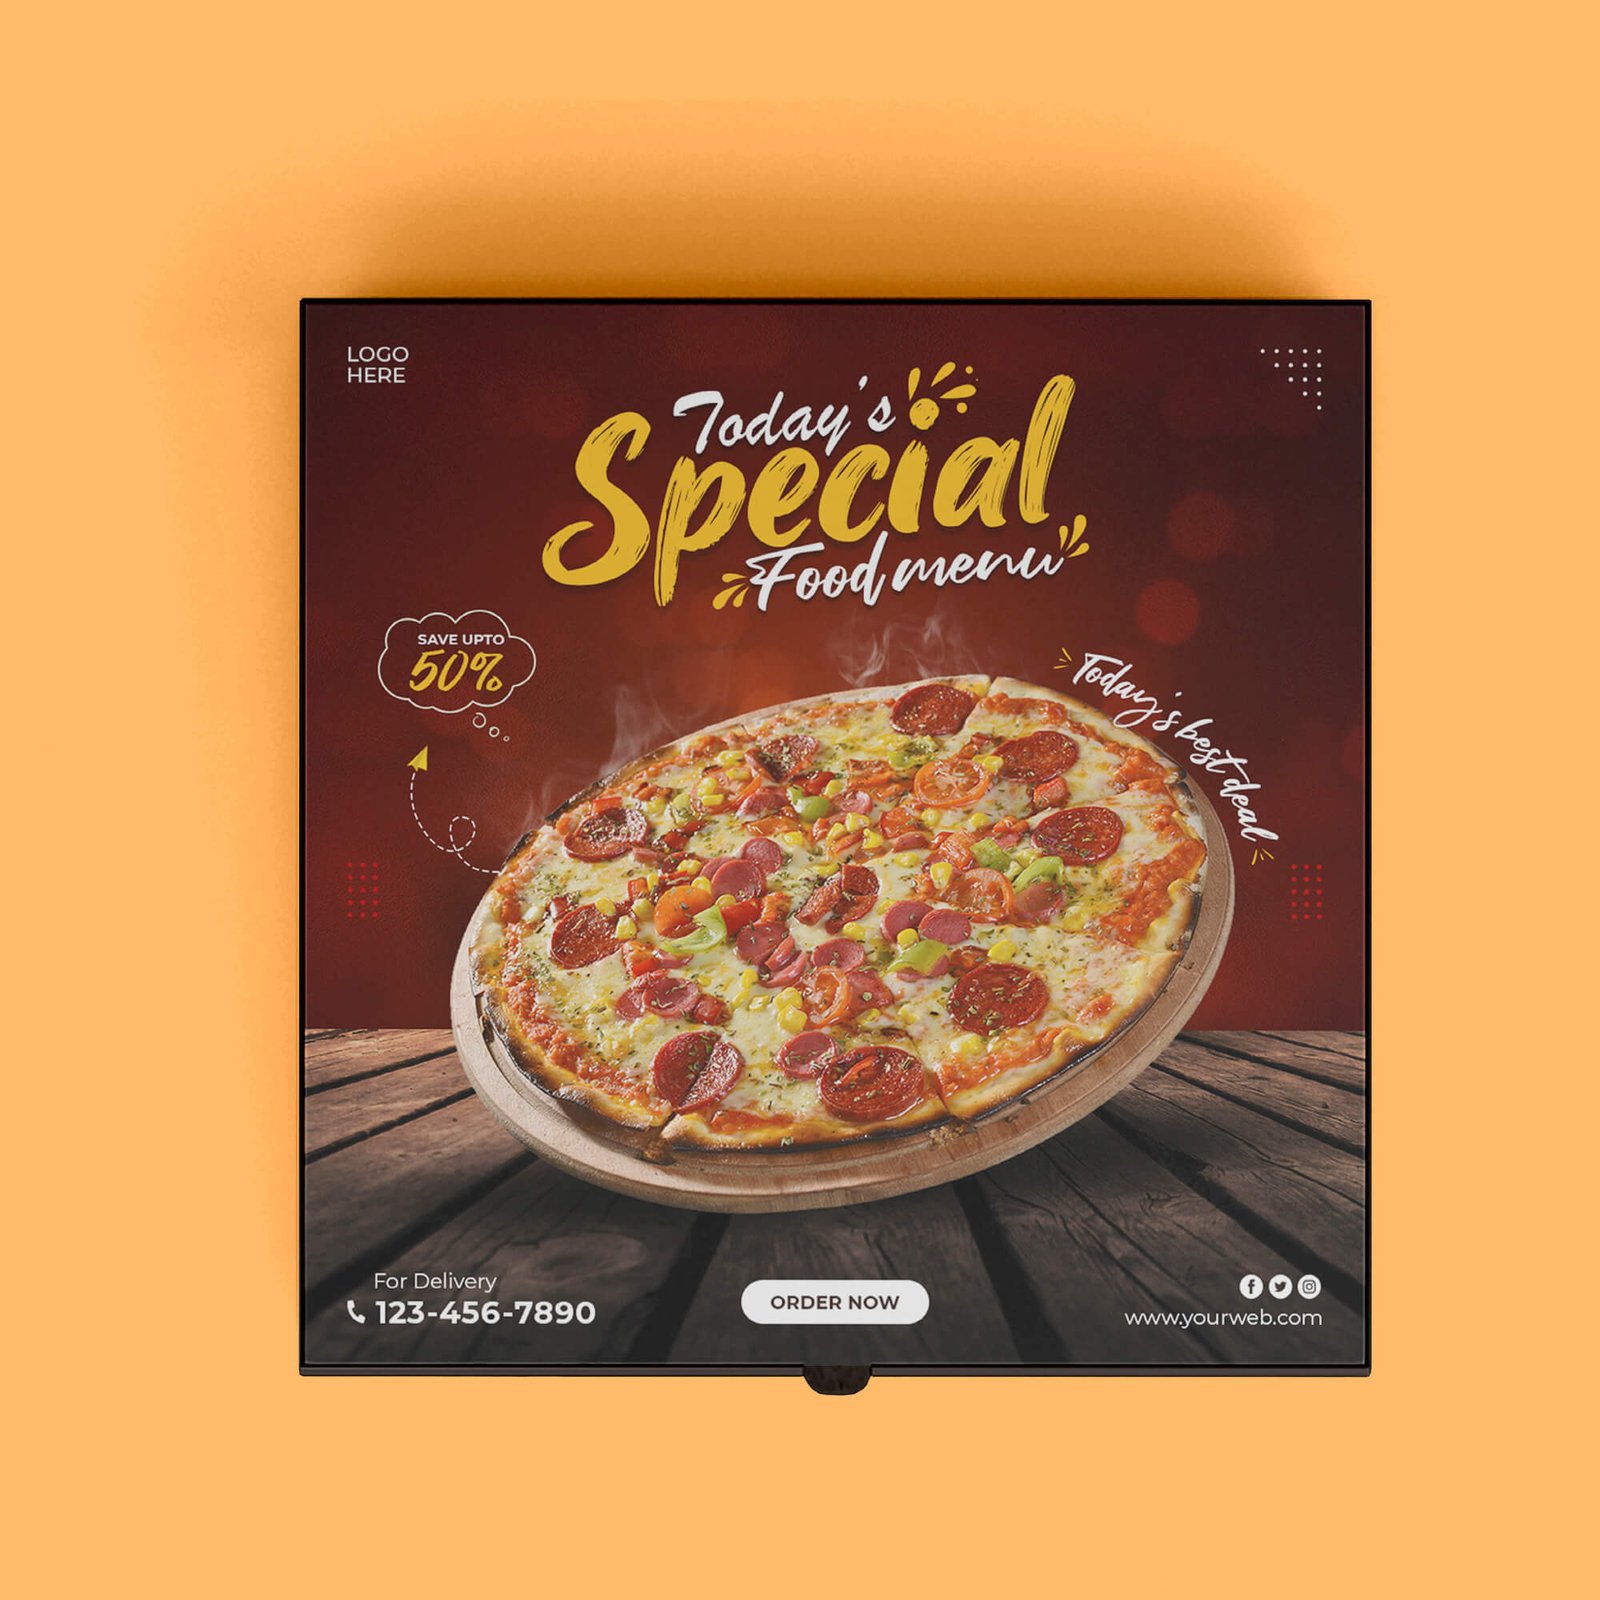 Design Free Pizza Packaging Mockup PSD Template